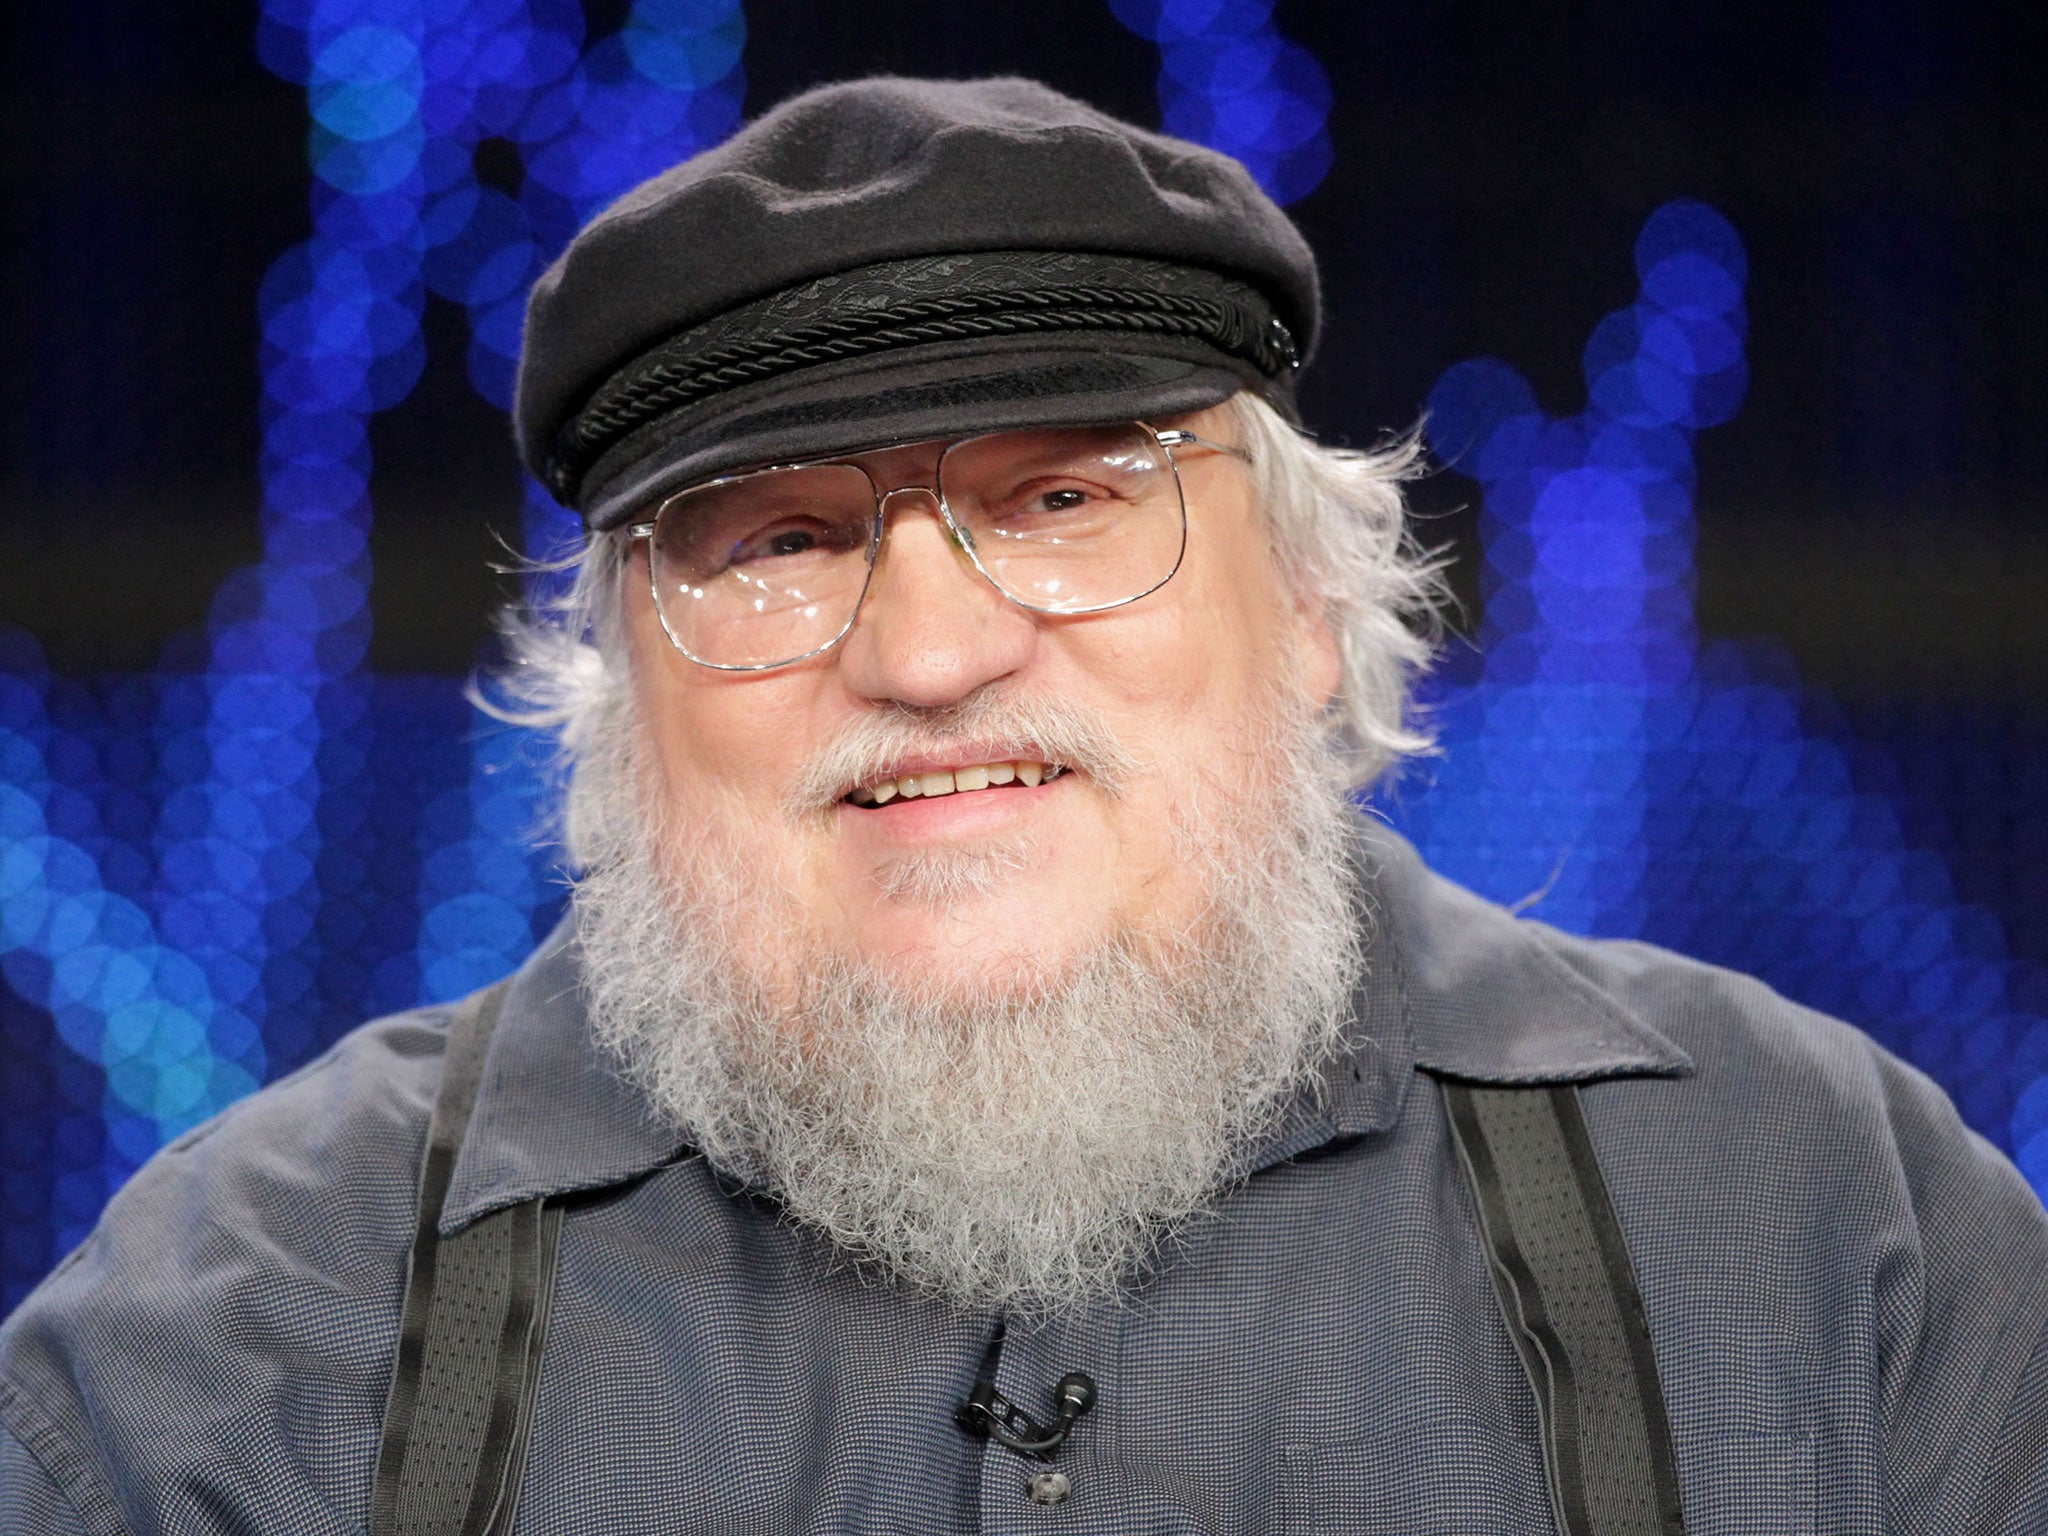 George RR Martin is currently working on next Game of Thrones book, The Winds of Winter